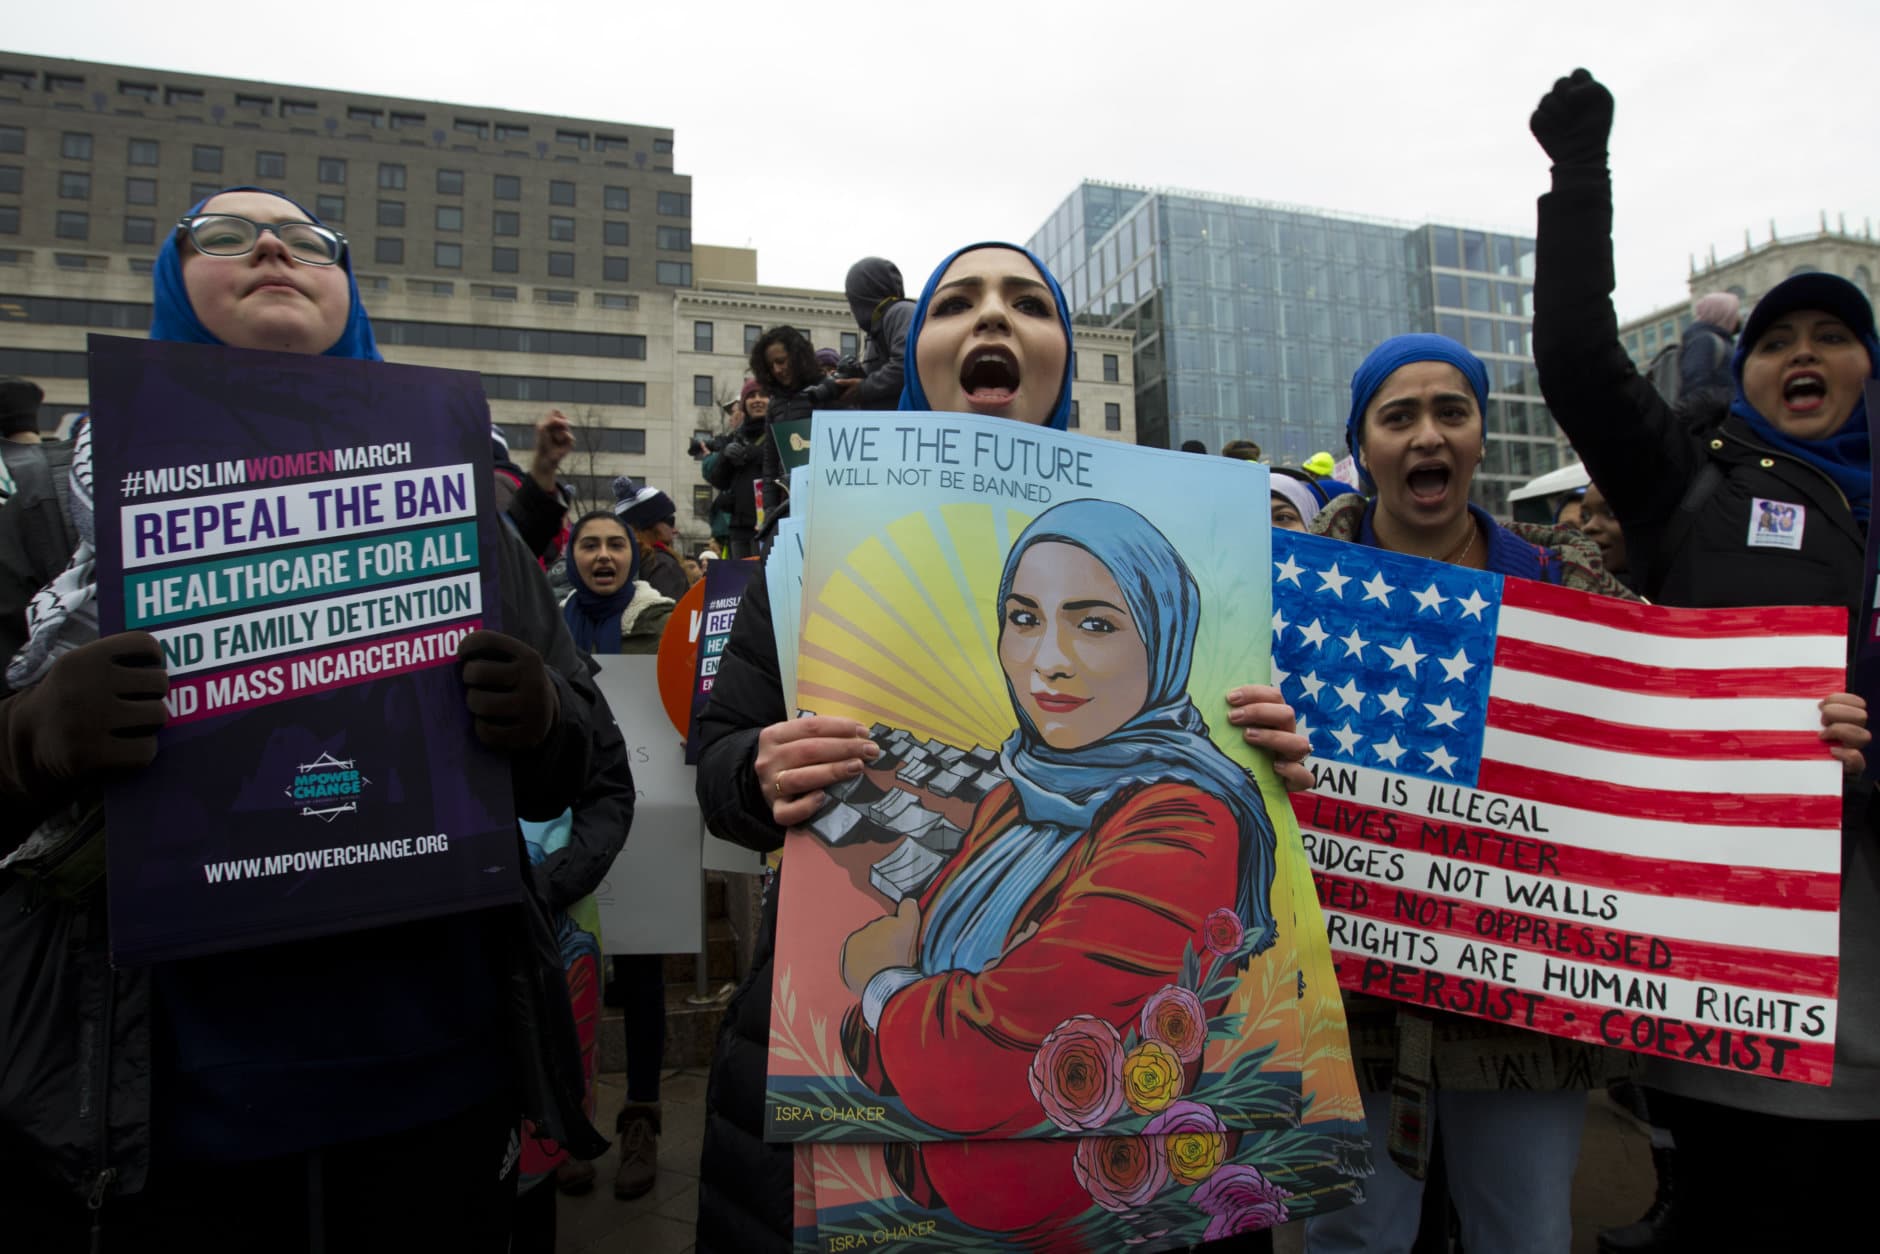 A group hold up signs at freedom plaza during the women's march in Washington on Saturday, Jan. 19, 2019. (AP Photo/Jose Luis Magana)